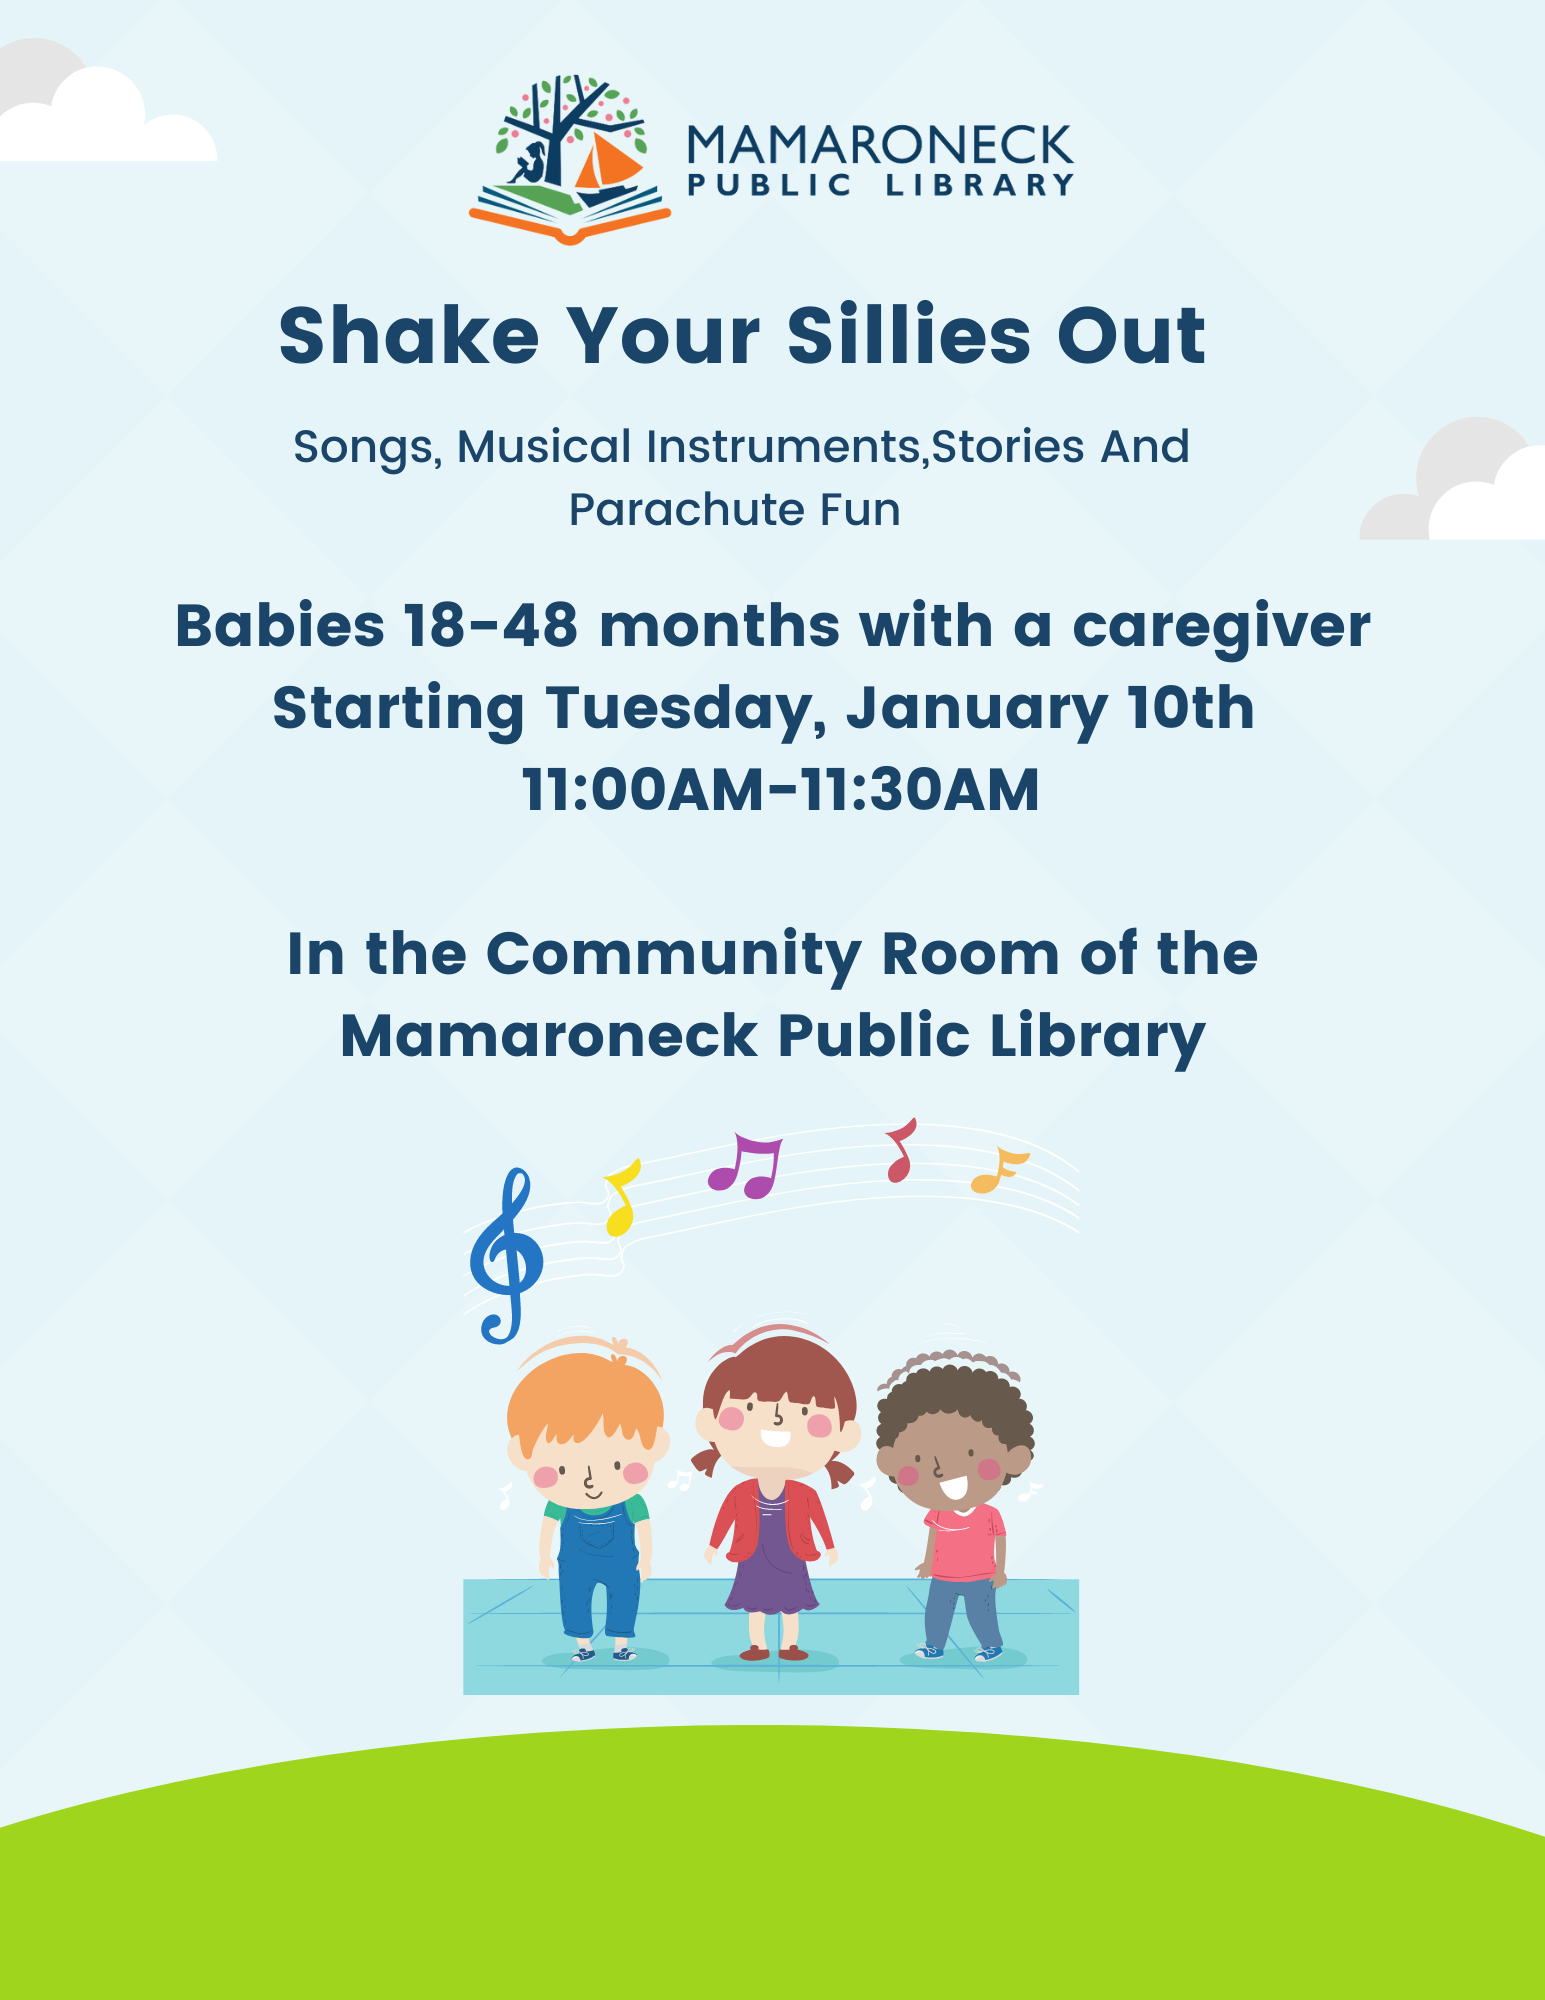 Shake Your Sillies Out - pre-school children - every Tuesday 11-11:30am